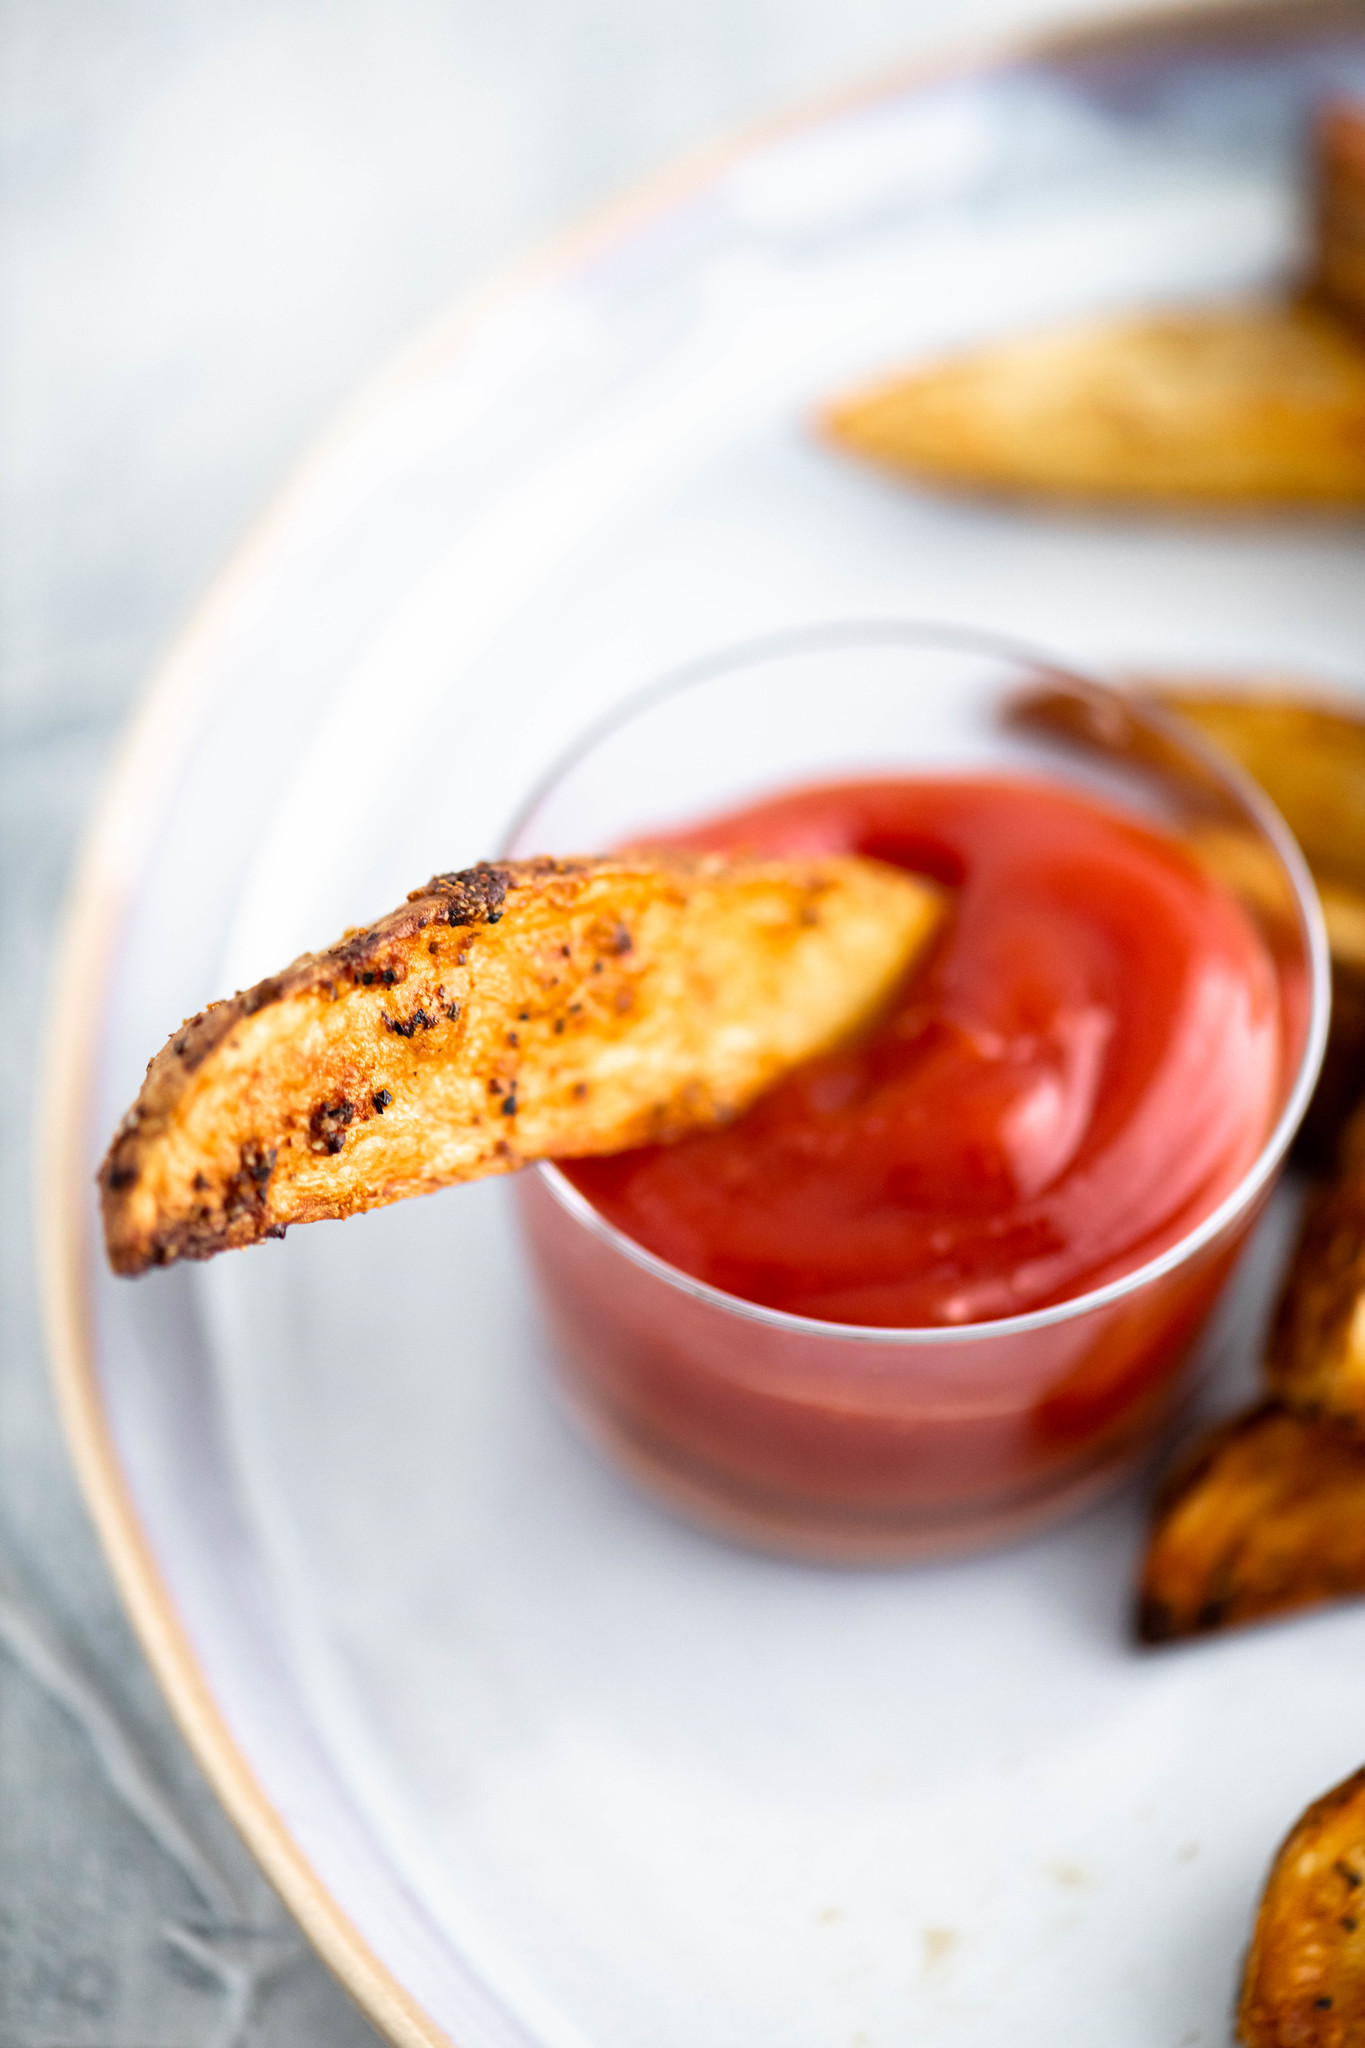 Air fryer potato wedge dipped in a small glass bowl of ketchup.